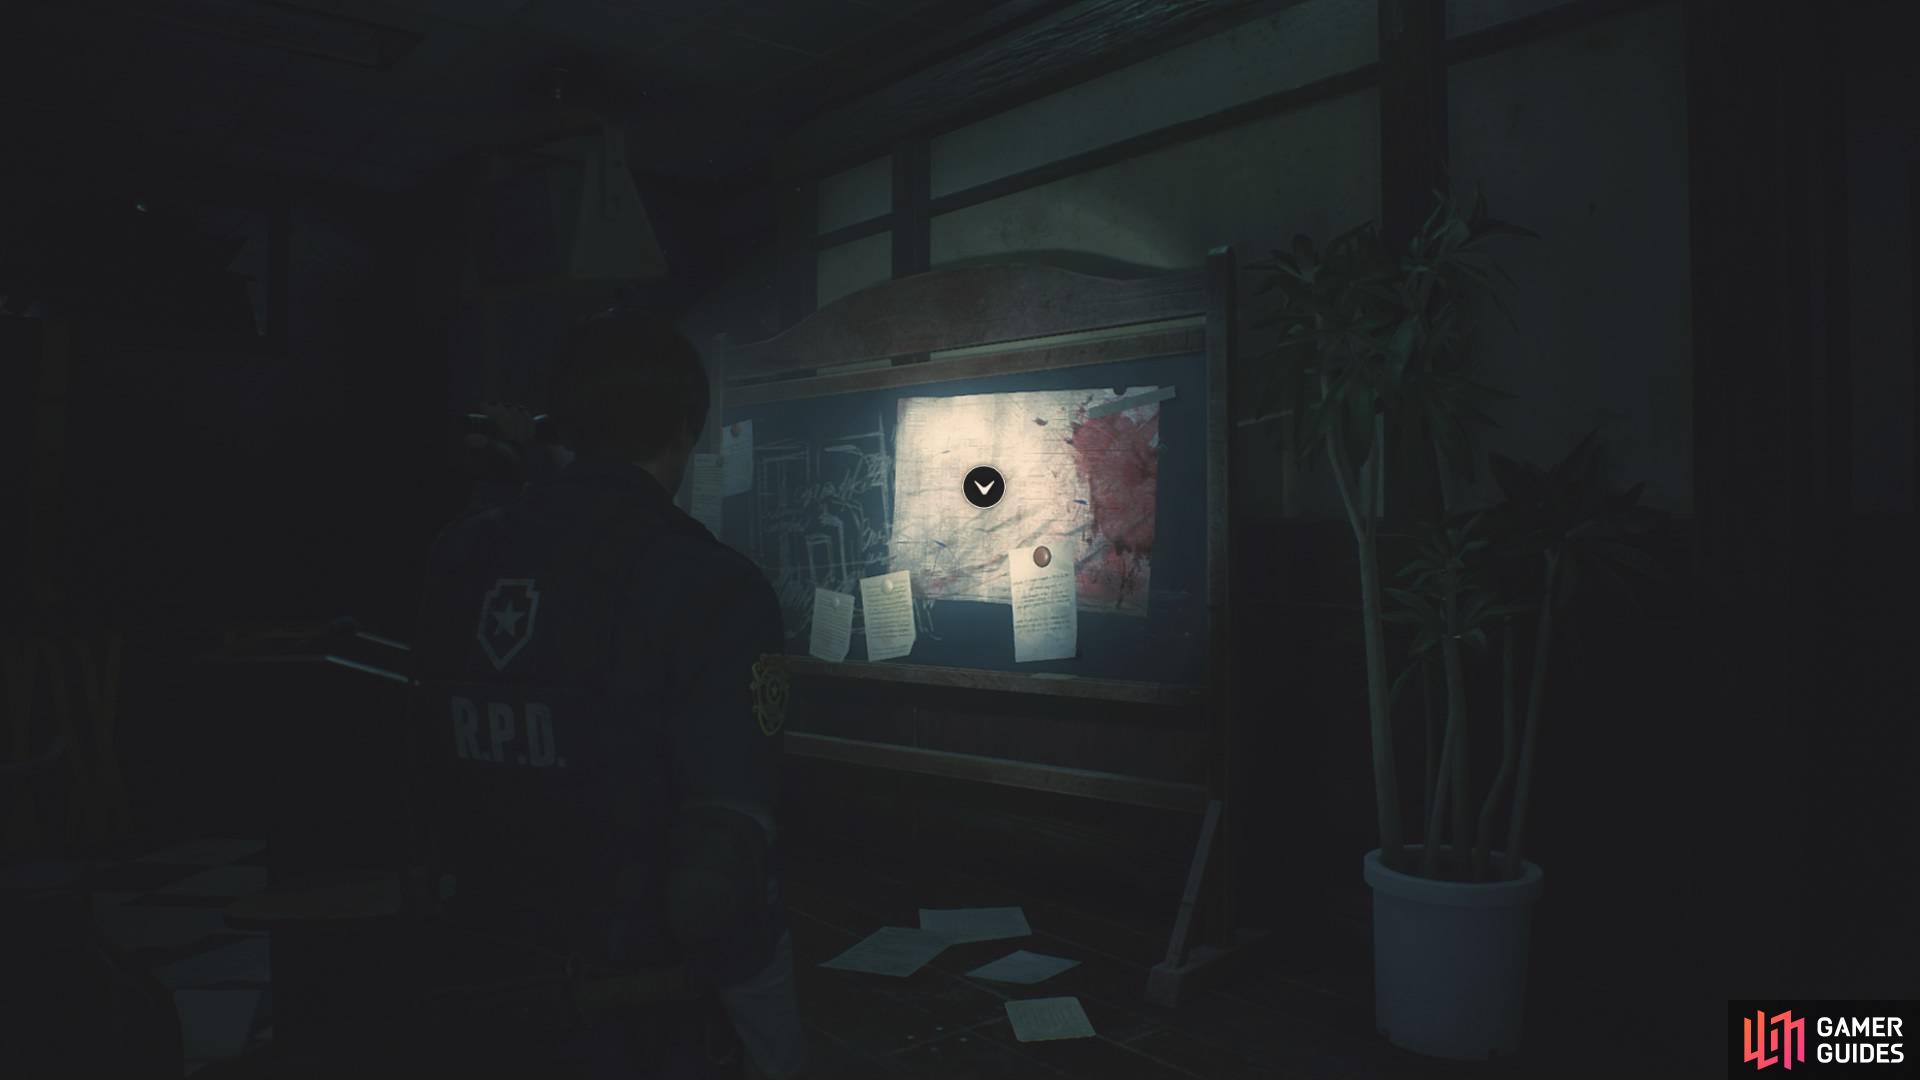 you'll be able to find the Police Station 1F Map pinned on a board in the Operations Room.